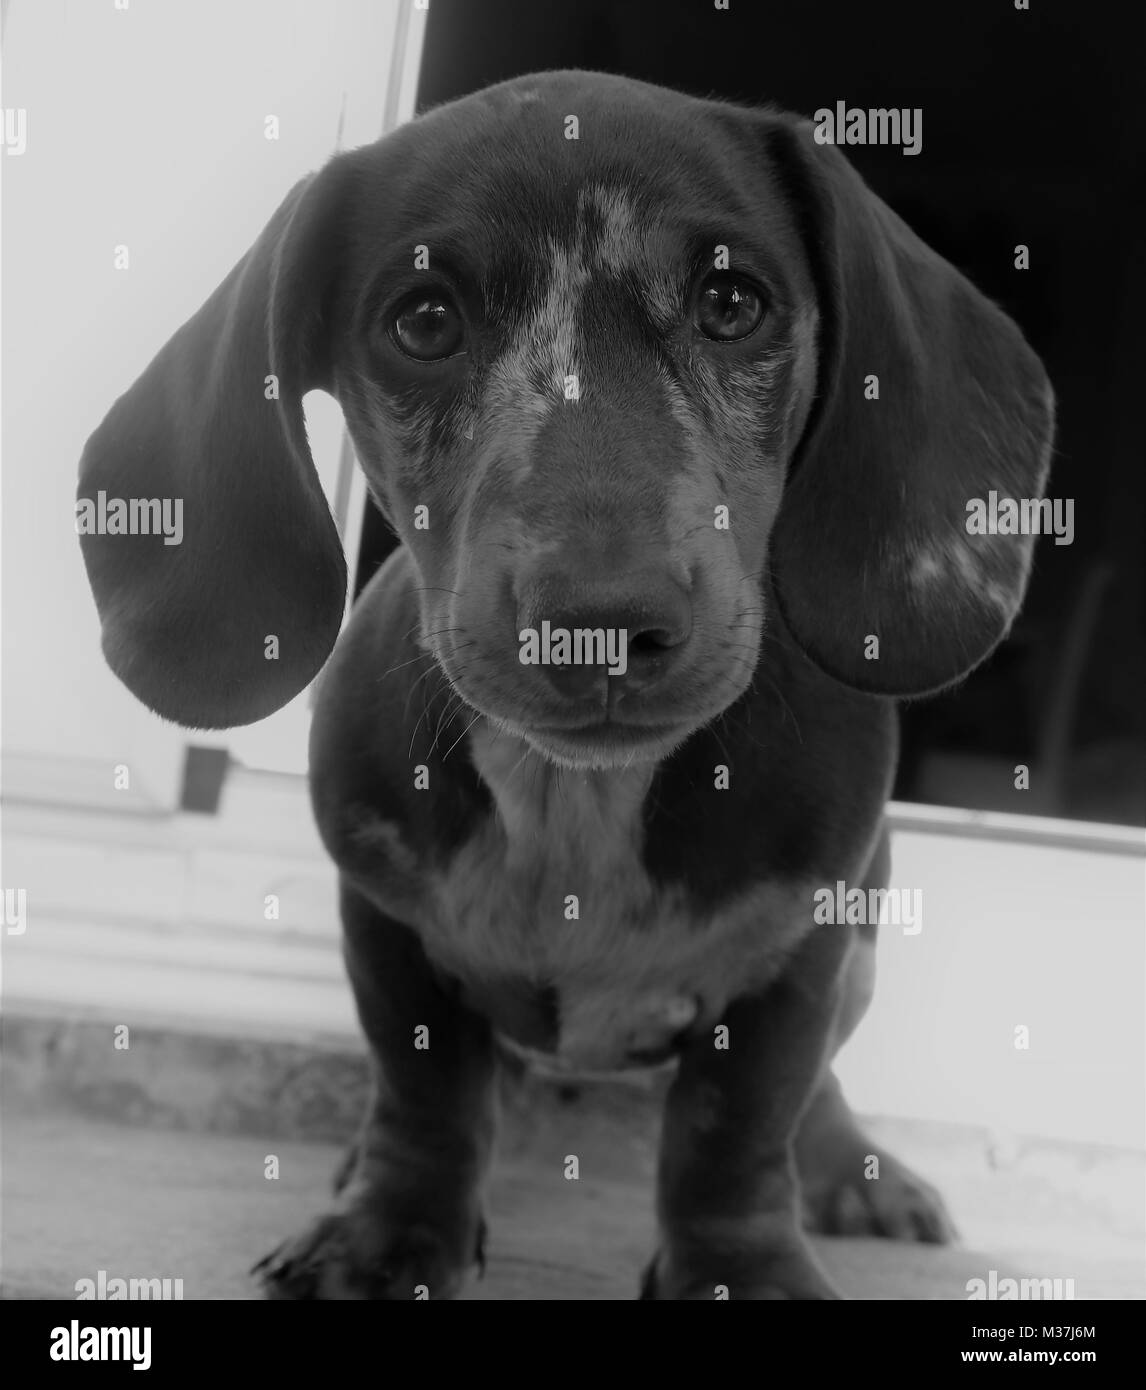 A Male dachshund puppy in black and white Stock Photo